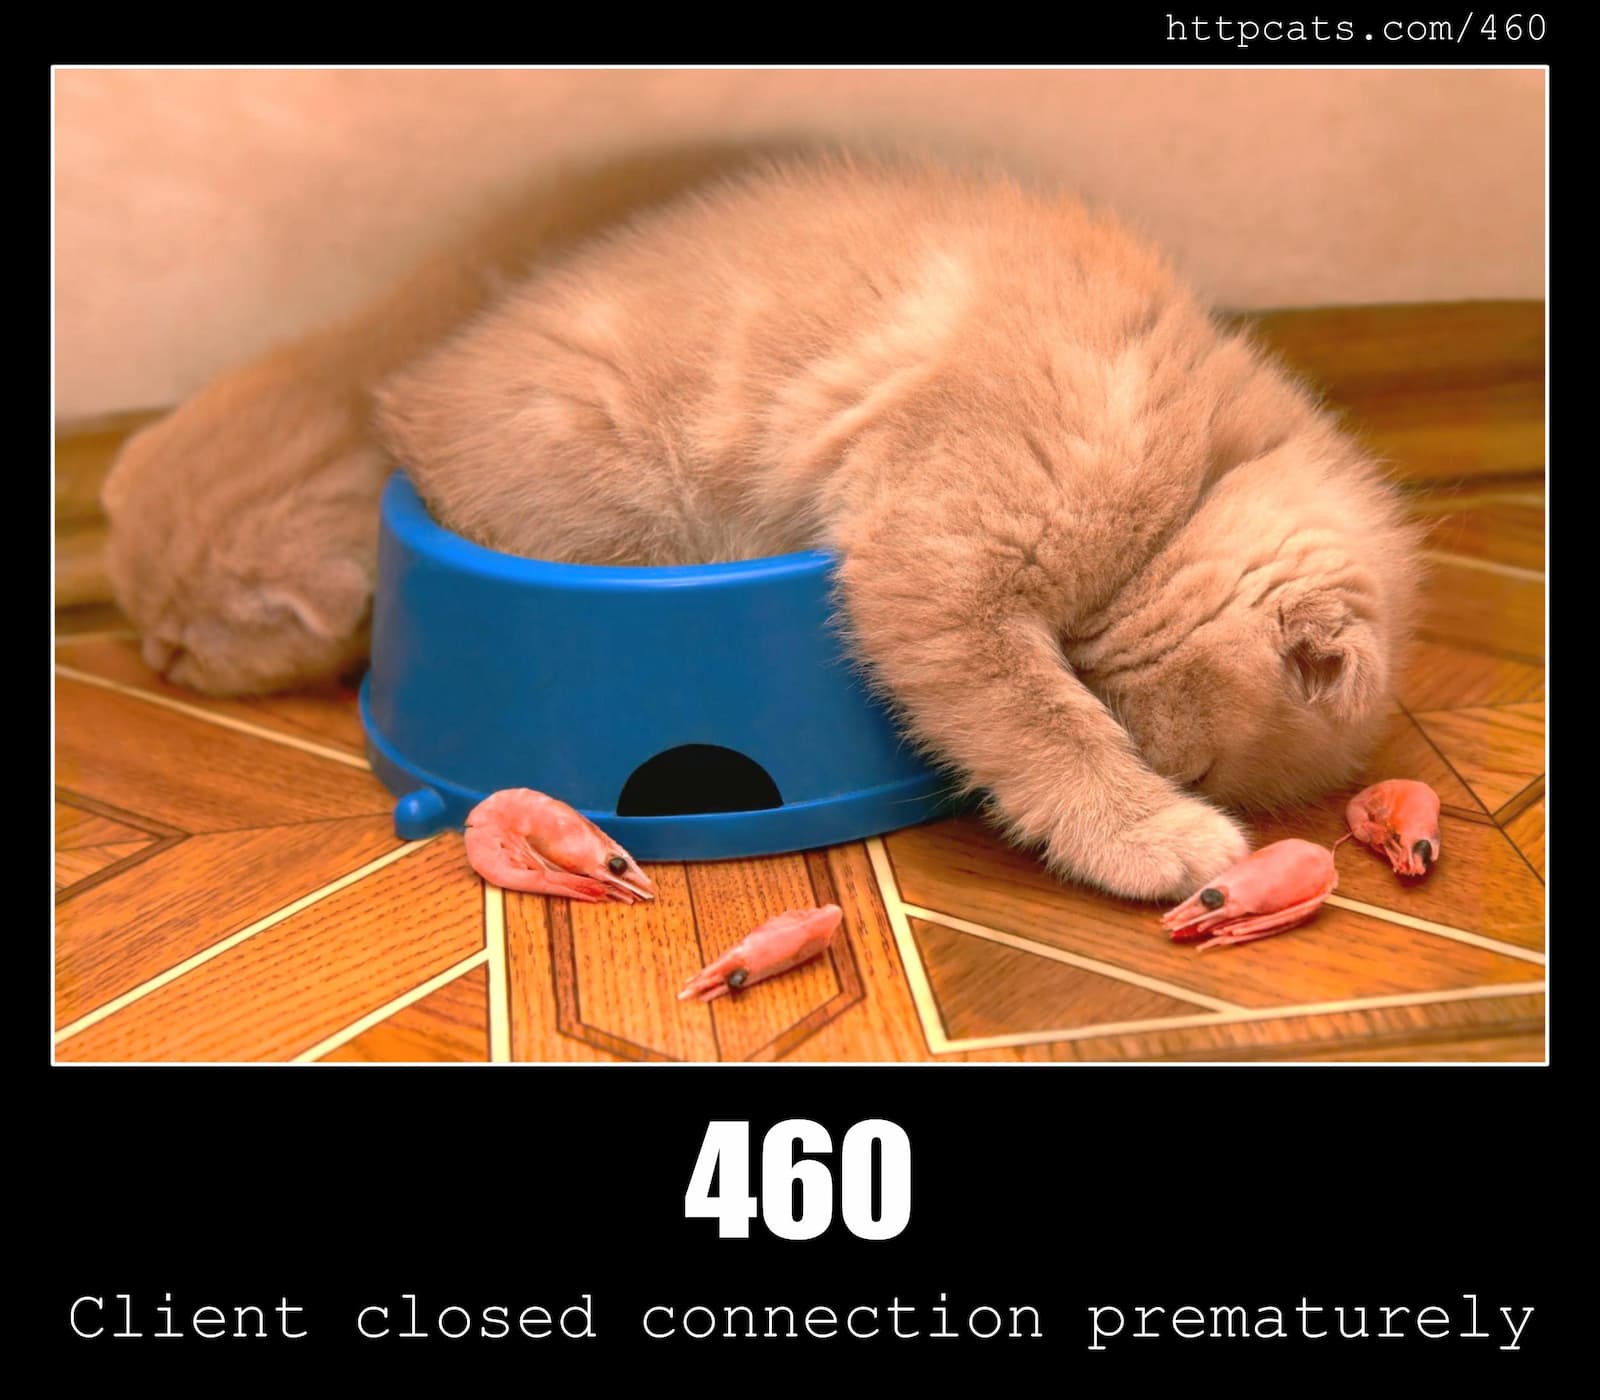 HTTP Status Code 460 Client closed connection prematurely